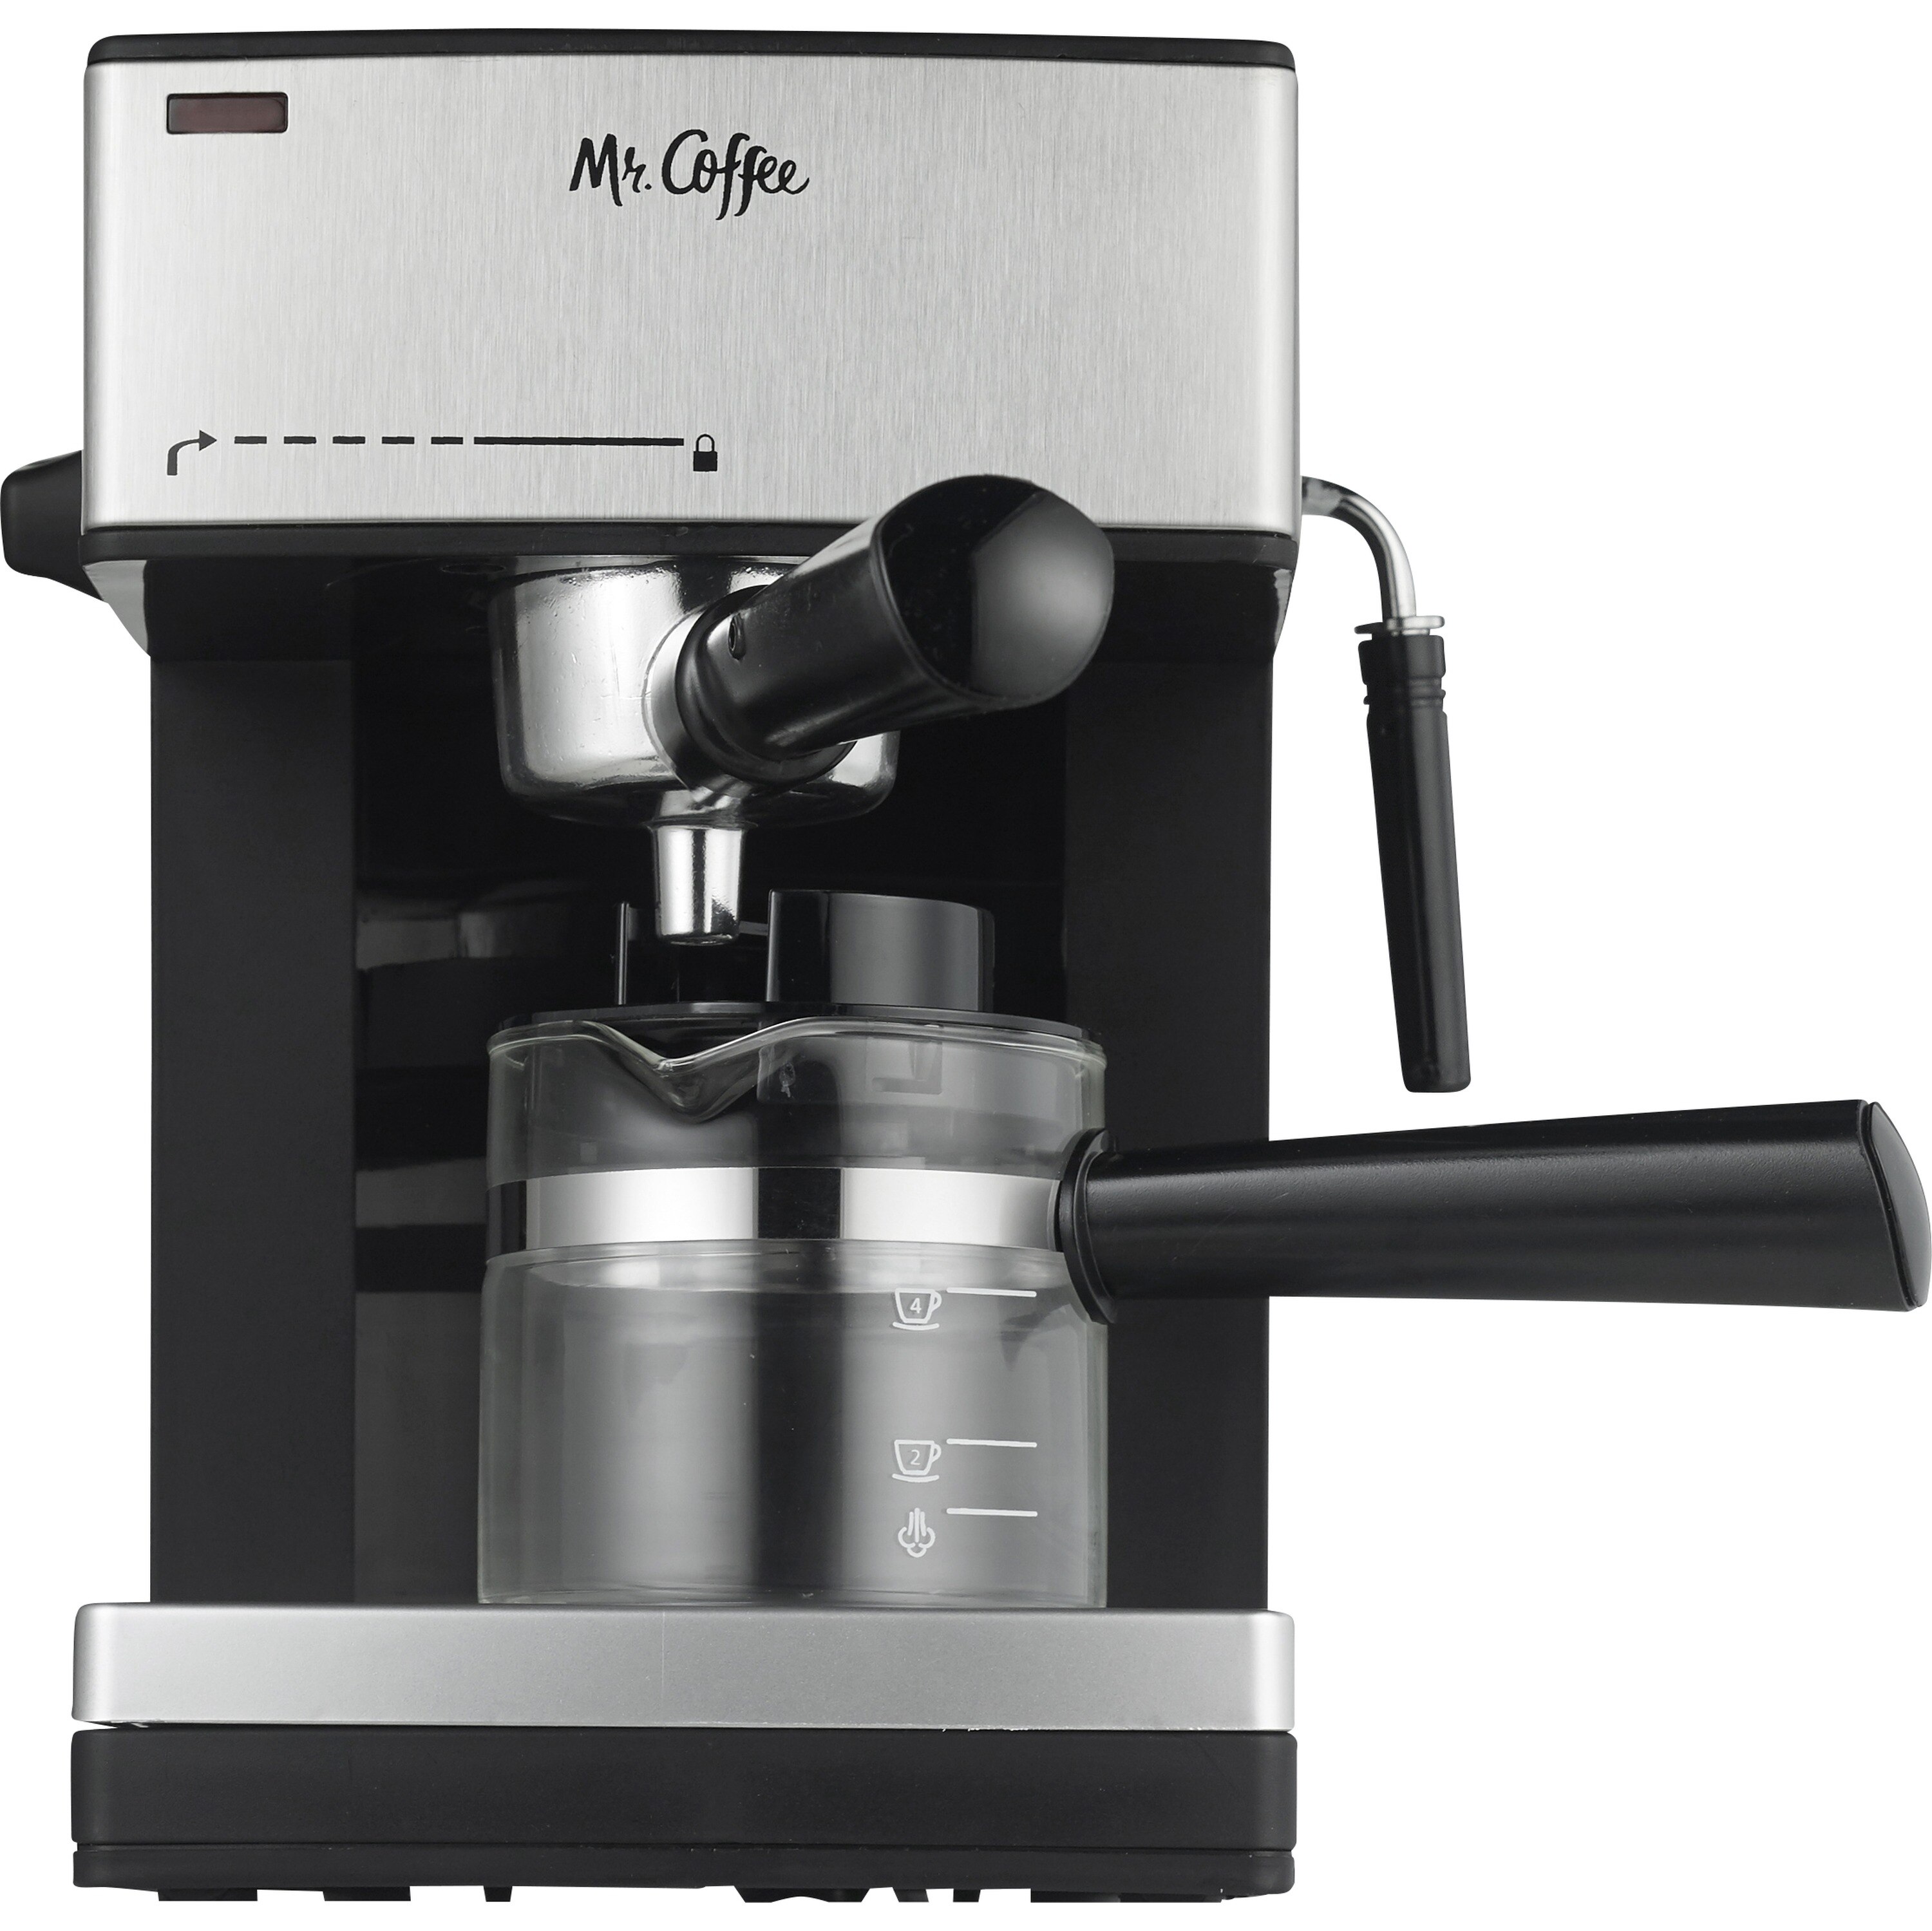 Imusa Espresso Machine: First Use and Review 